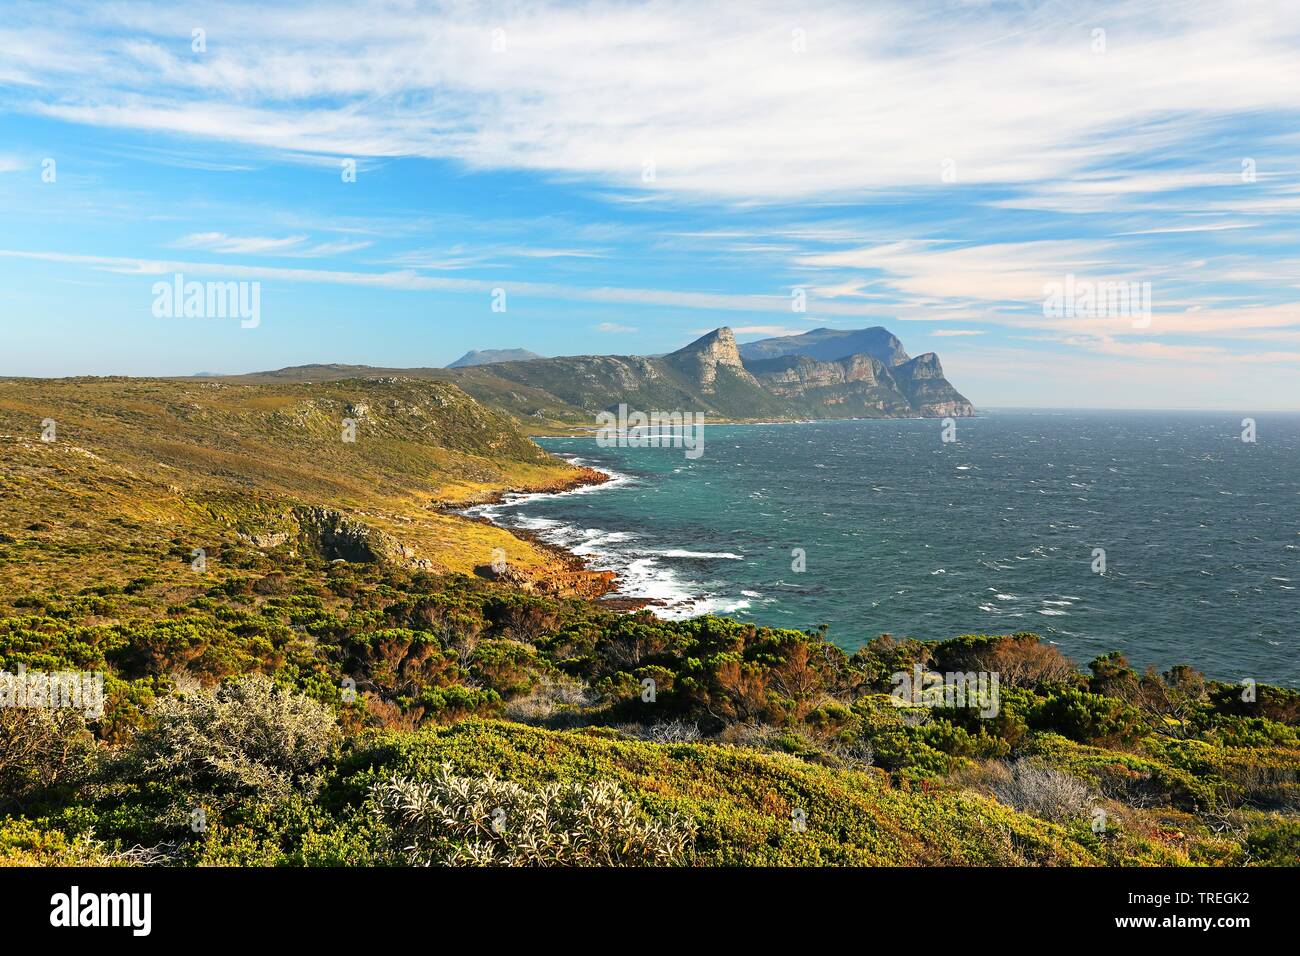 Cape of Good Hope, view north onto the eastern coast, South Africa Stock Photo